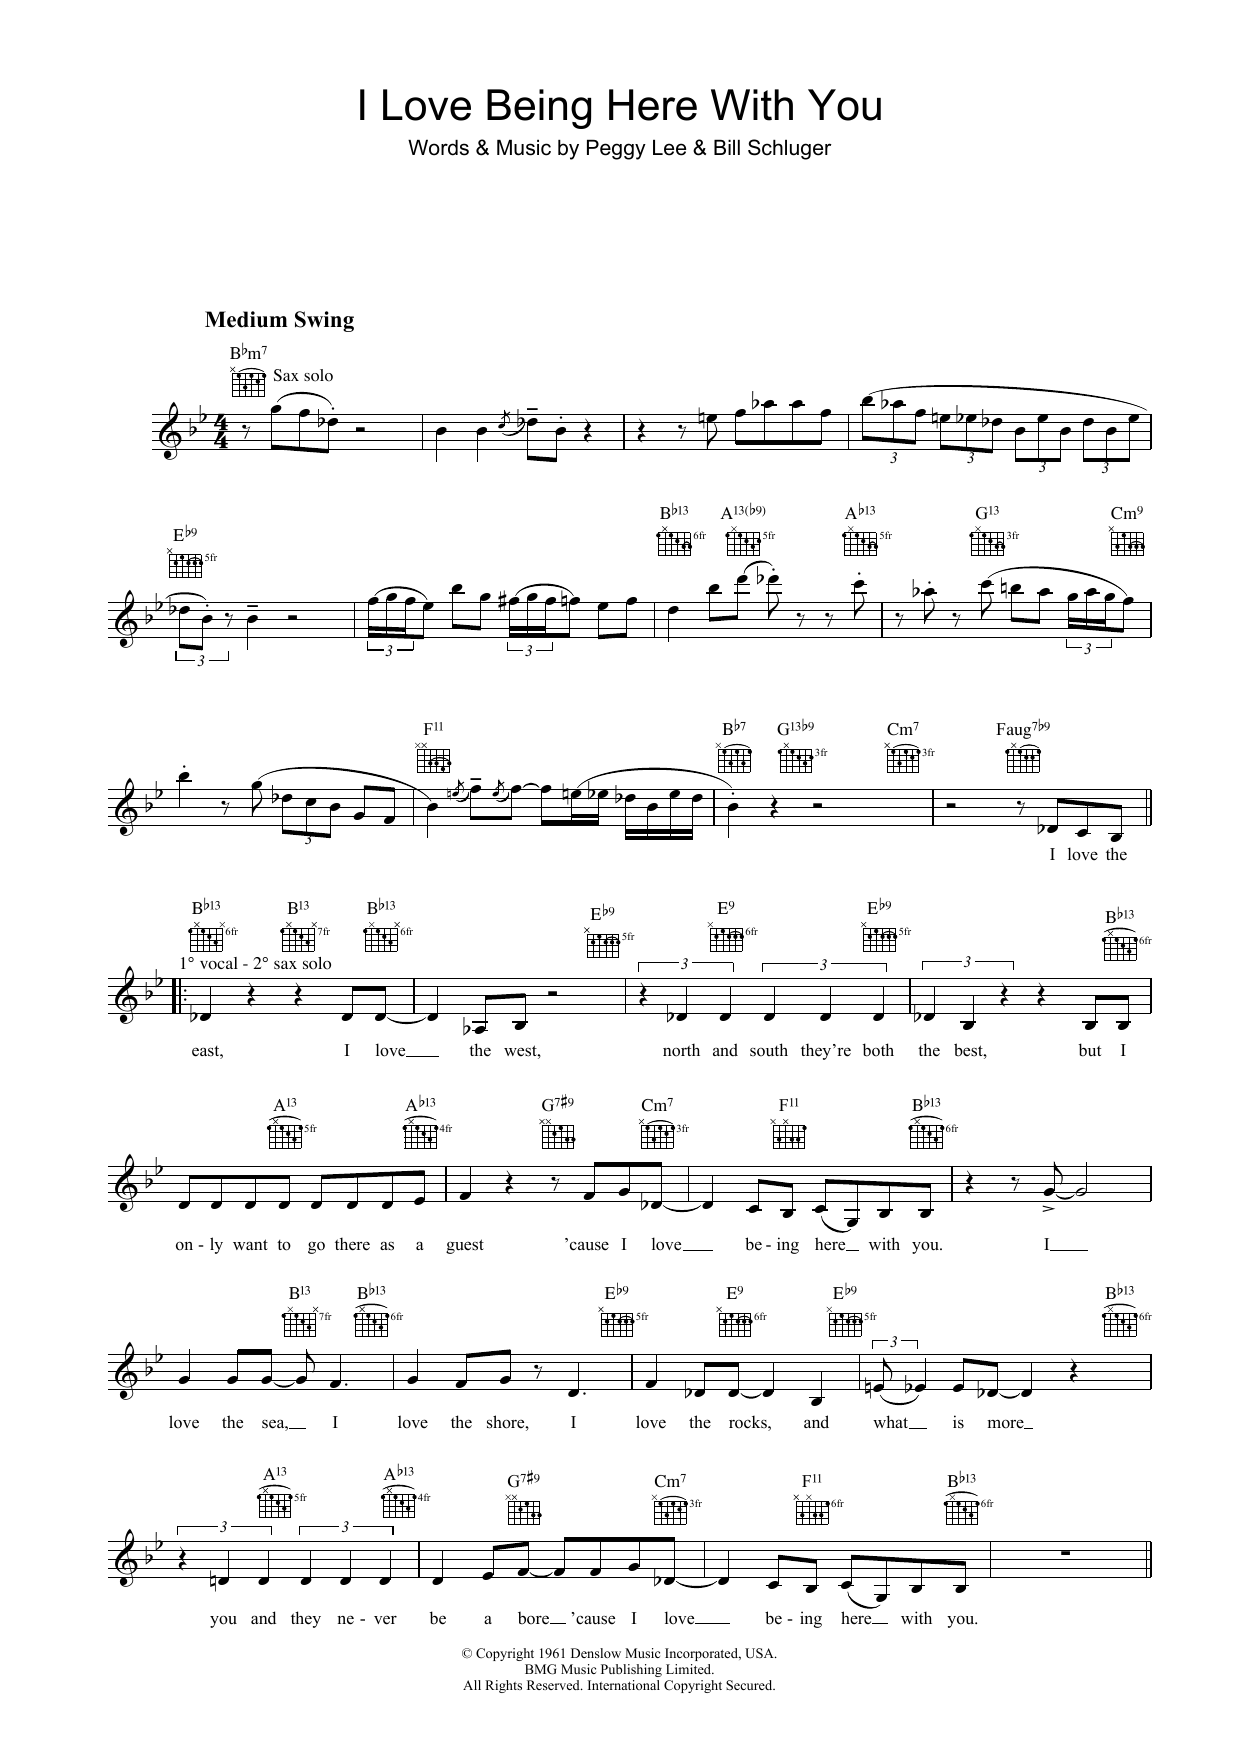 Download Diana Krall I Love Being Here With You Sheet Music